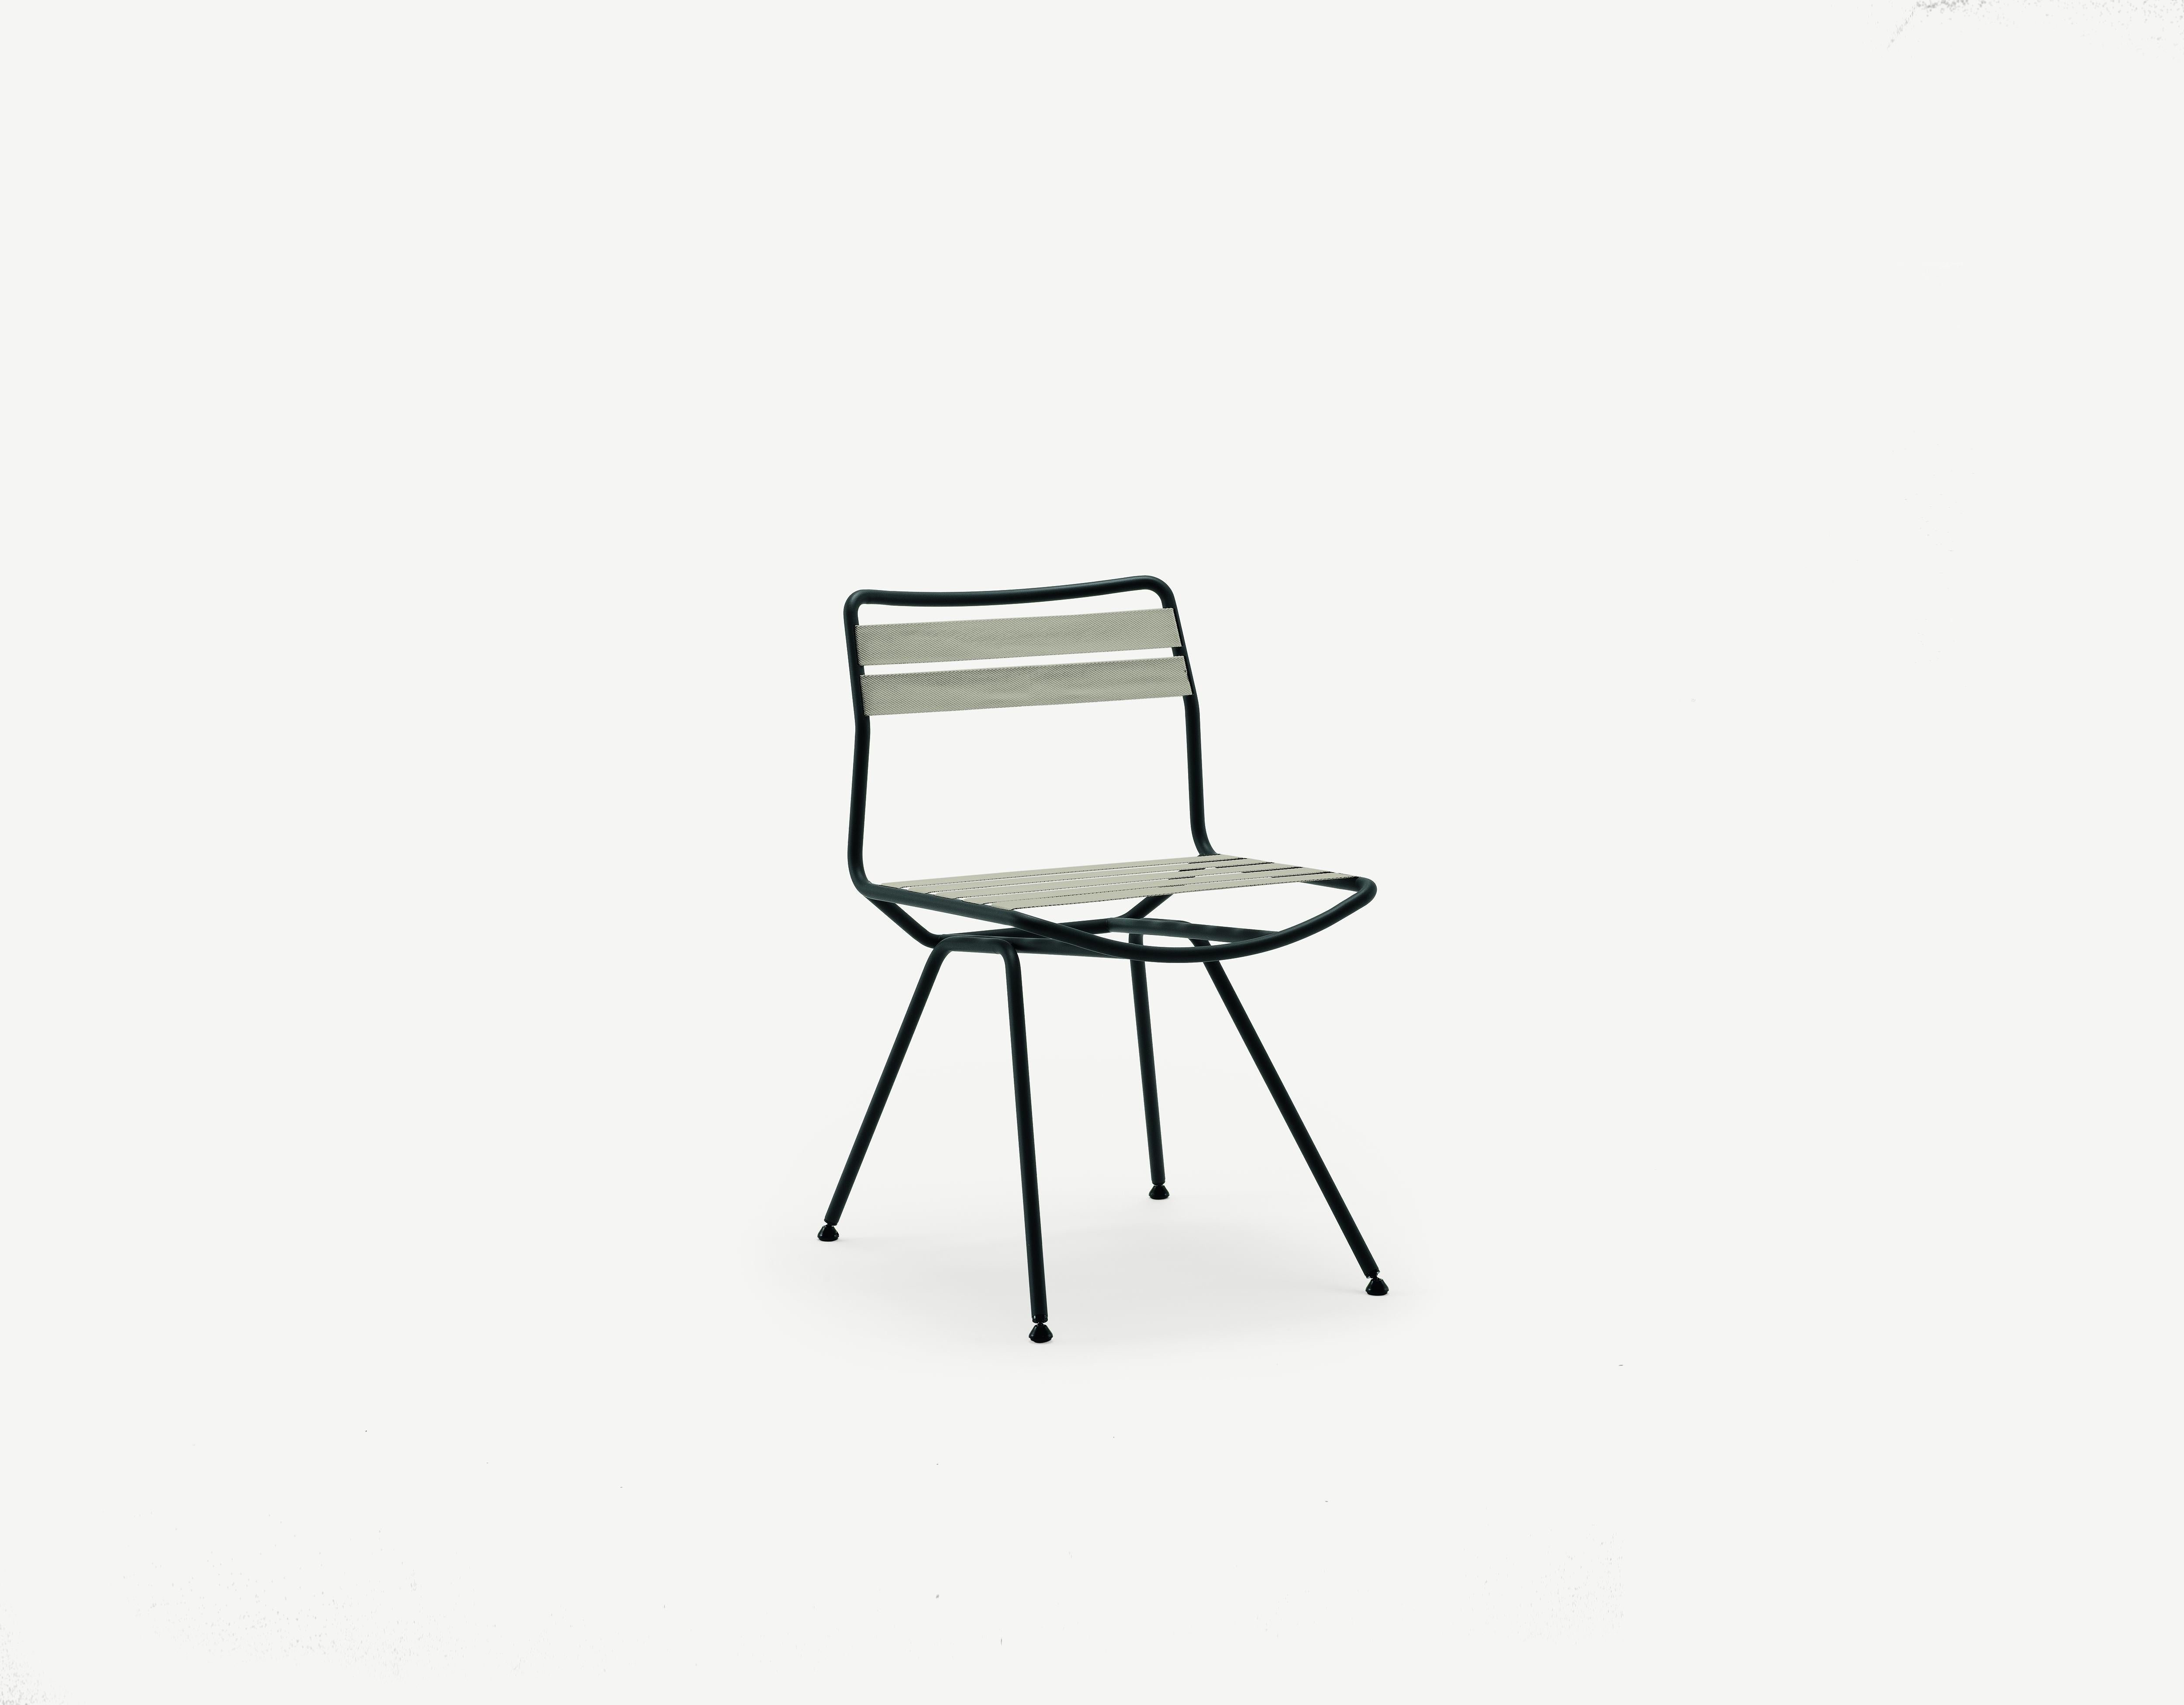 Zanotta Dan Chair in String Elastic Seat & Back with Black Stainless Steel Frame by Patrick Norguet

Stainless steel 304 frame painted in matt iron grey or black for outdoor. Seat and backrest made of elastic straps in polyester thread available